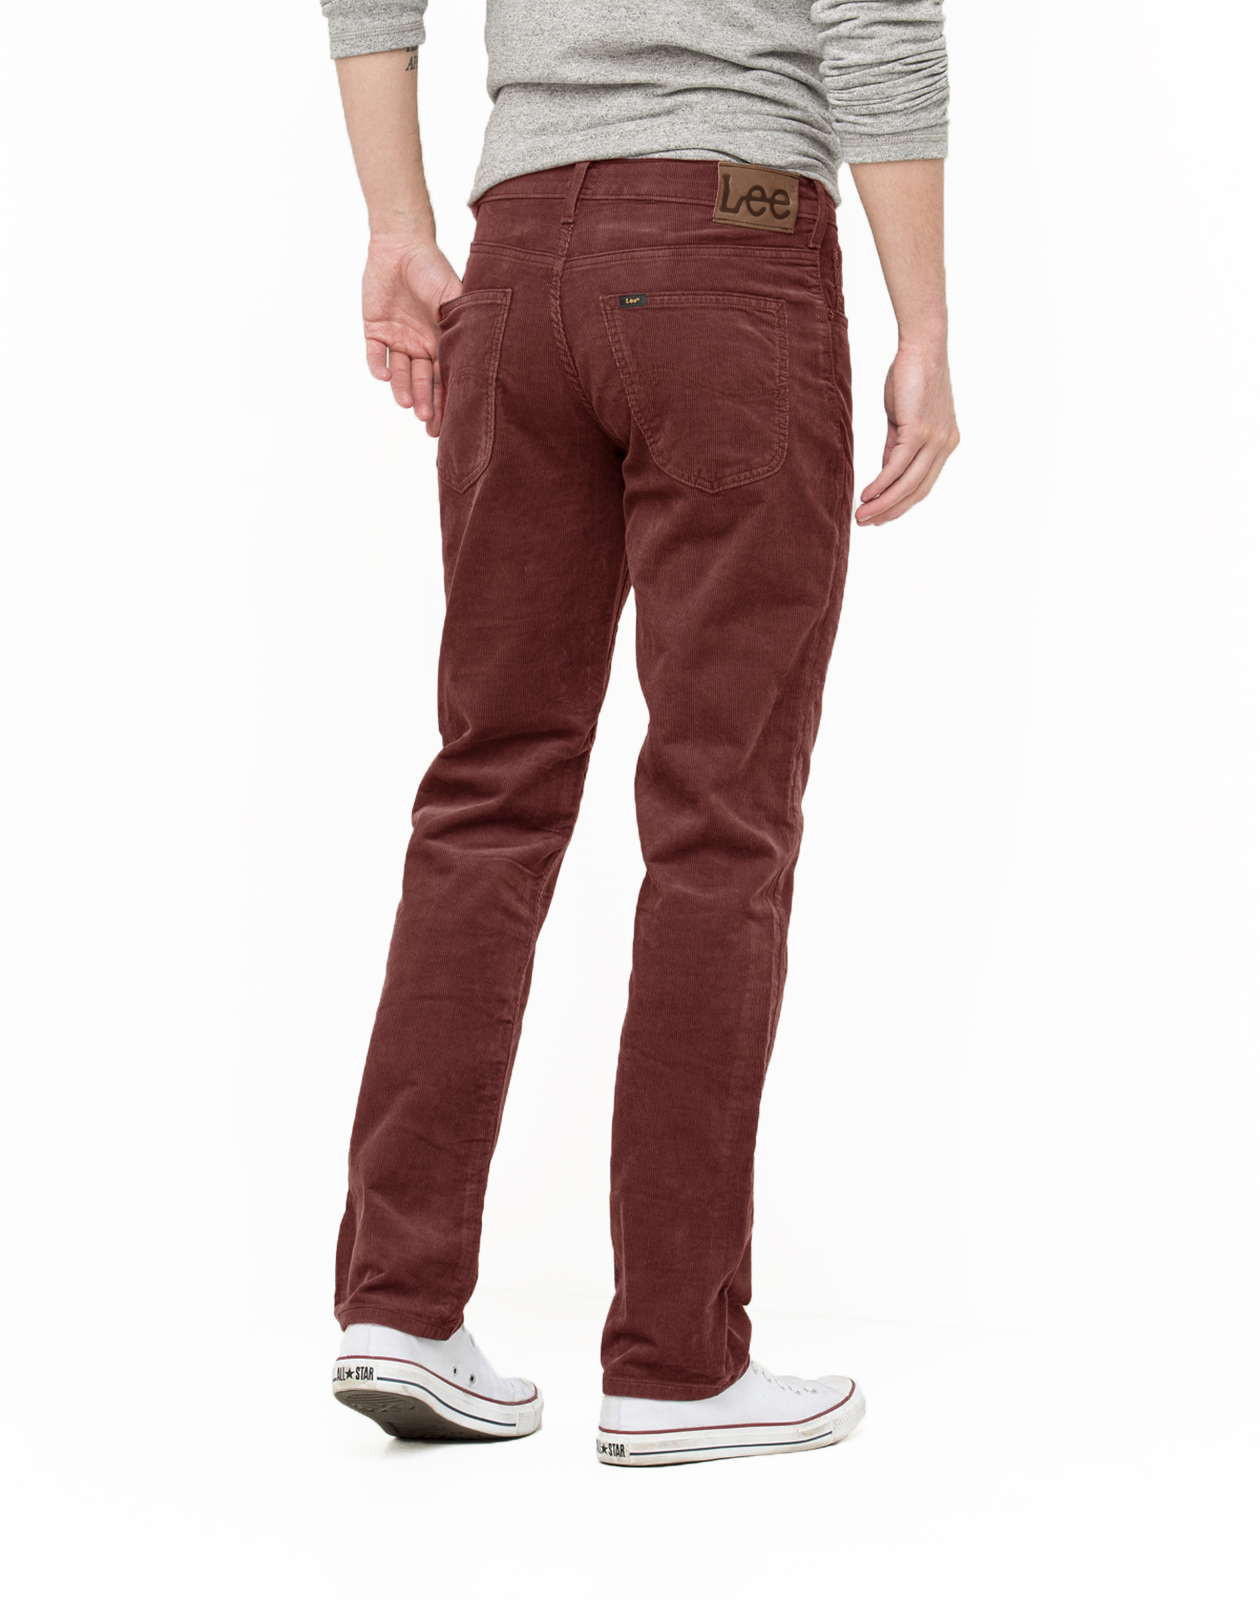 Lee Brooklyn New Men’s Cords Red Clay Stretch Corduroy Jeans Straight Fit